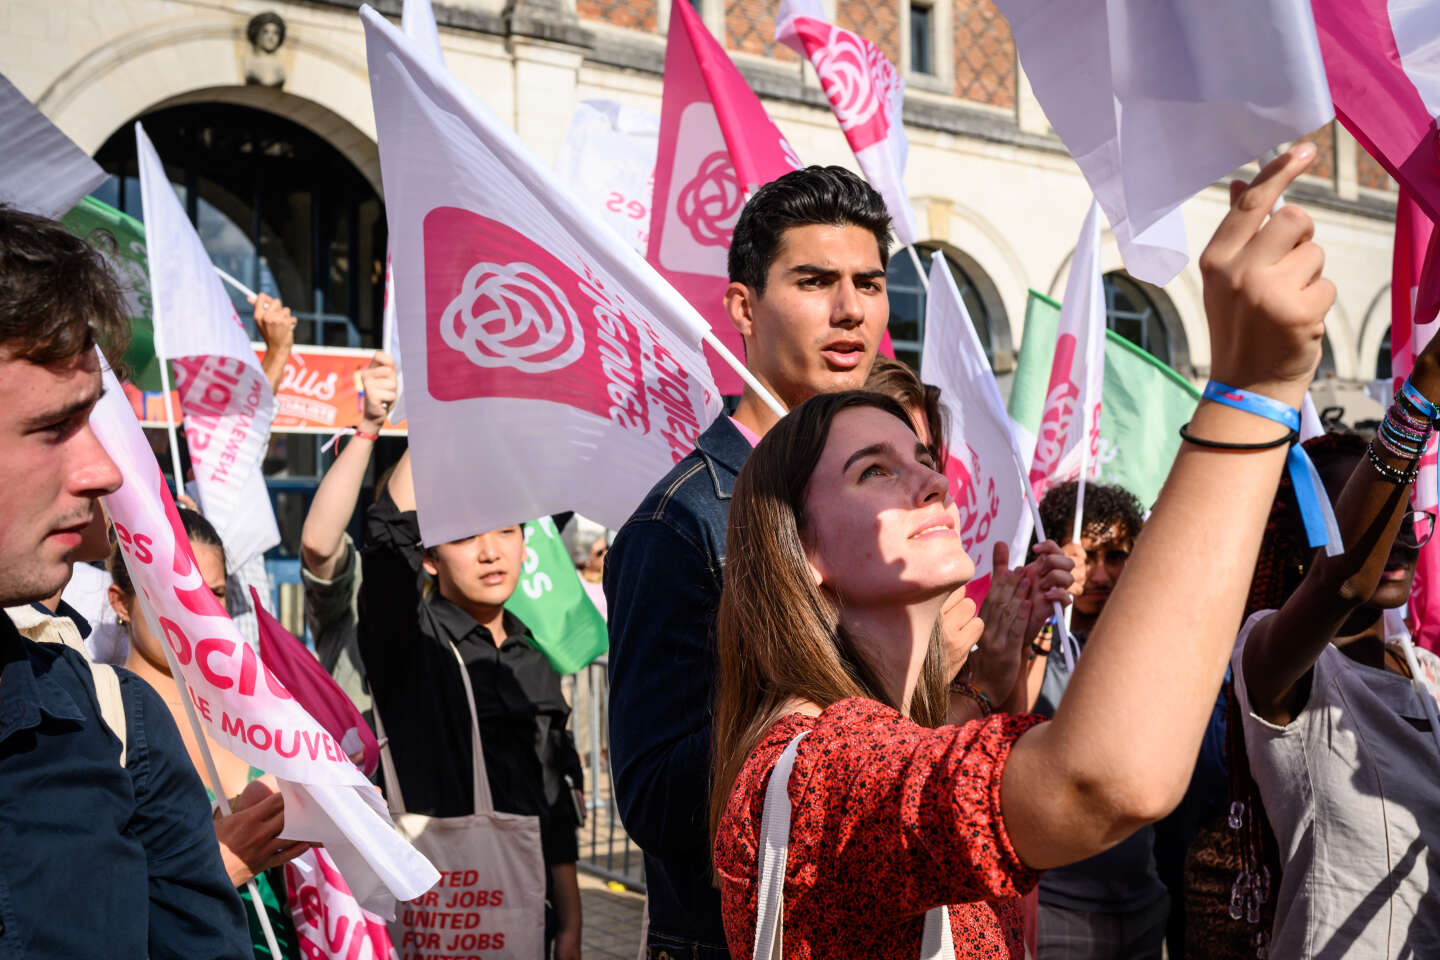 “Young socialists, we want to defend a ‘life in pink’ for future generations and give meaning to the struggles carried out by the left”